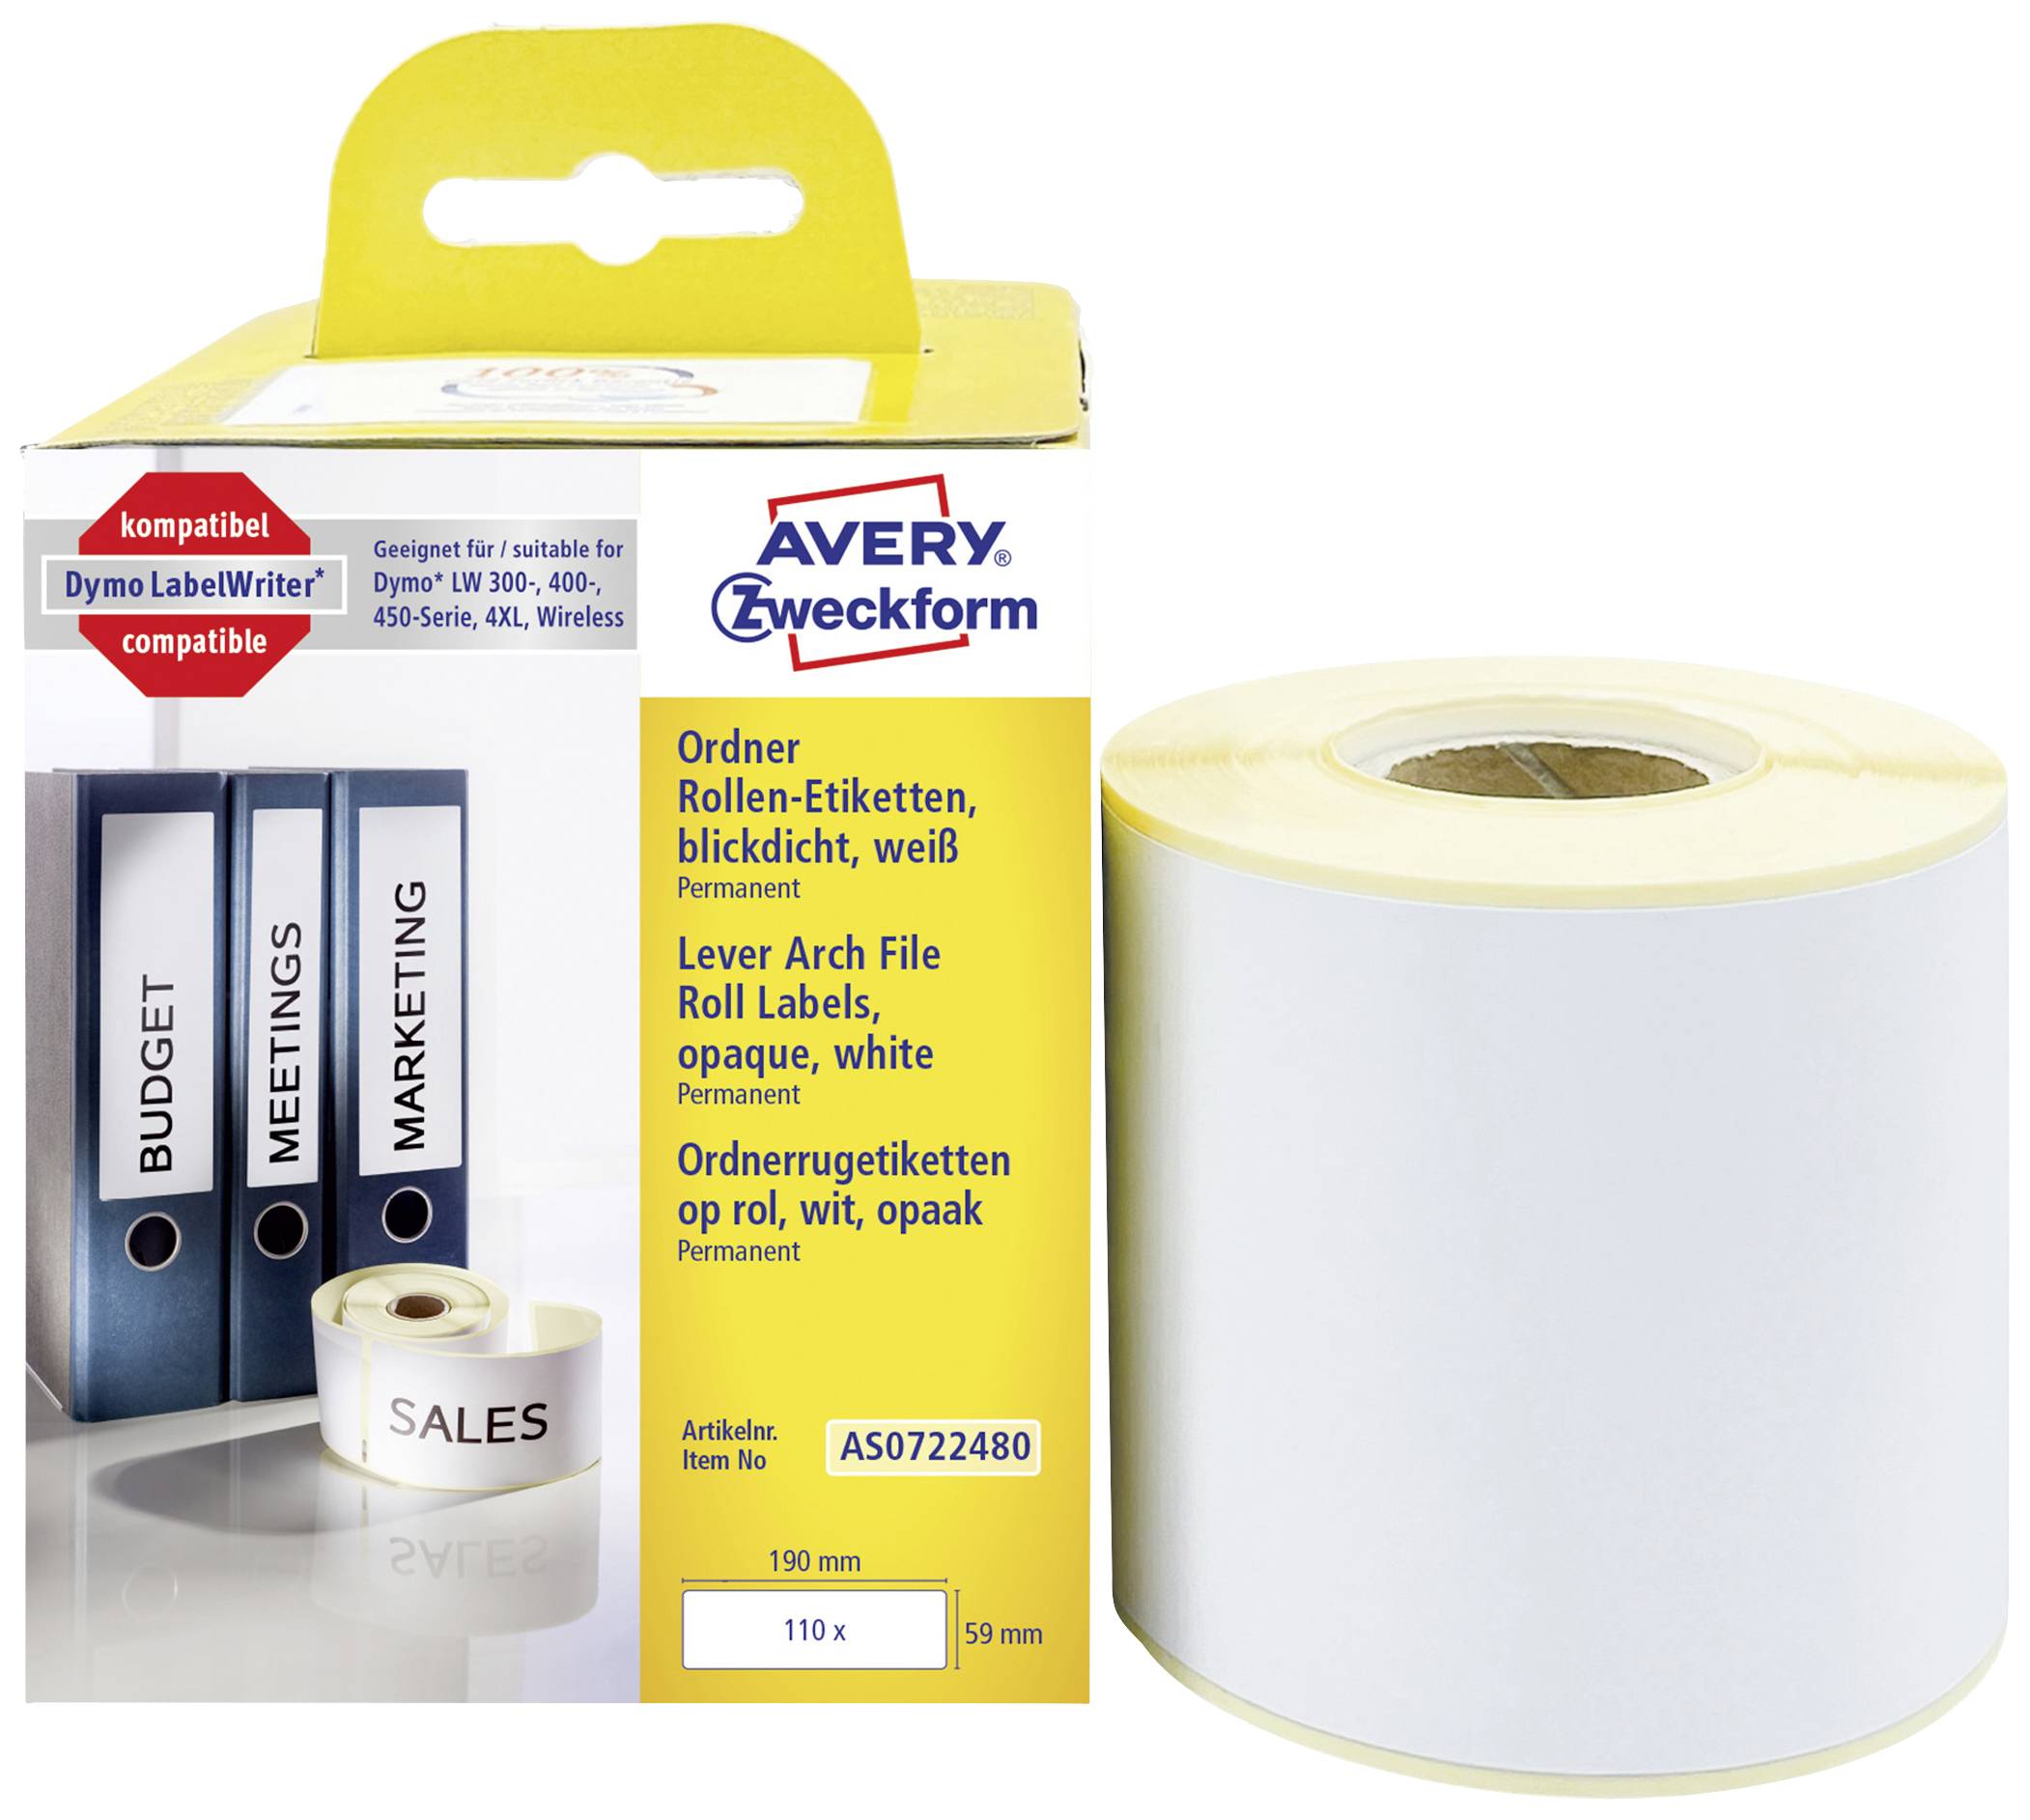 ZWECKFORM Avery - Permanent adhesive rectangular paper lever arch labels - weiß - 59 x 190 mm 110 Et